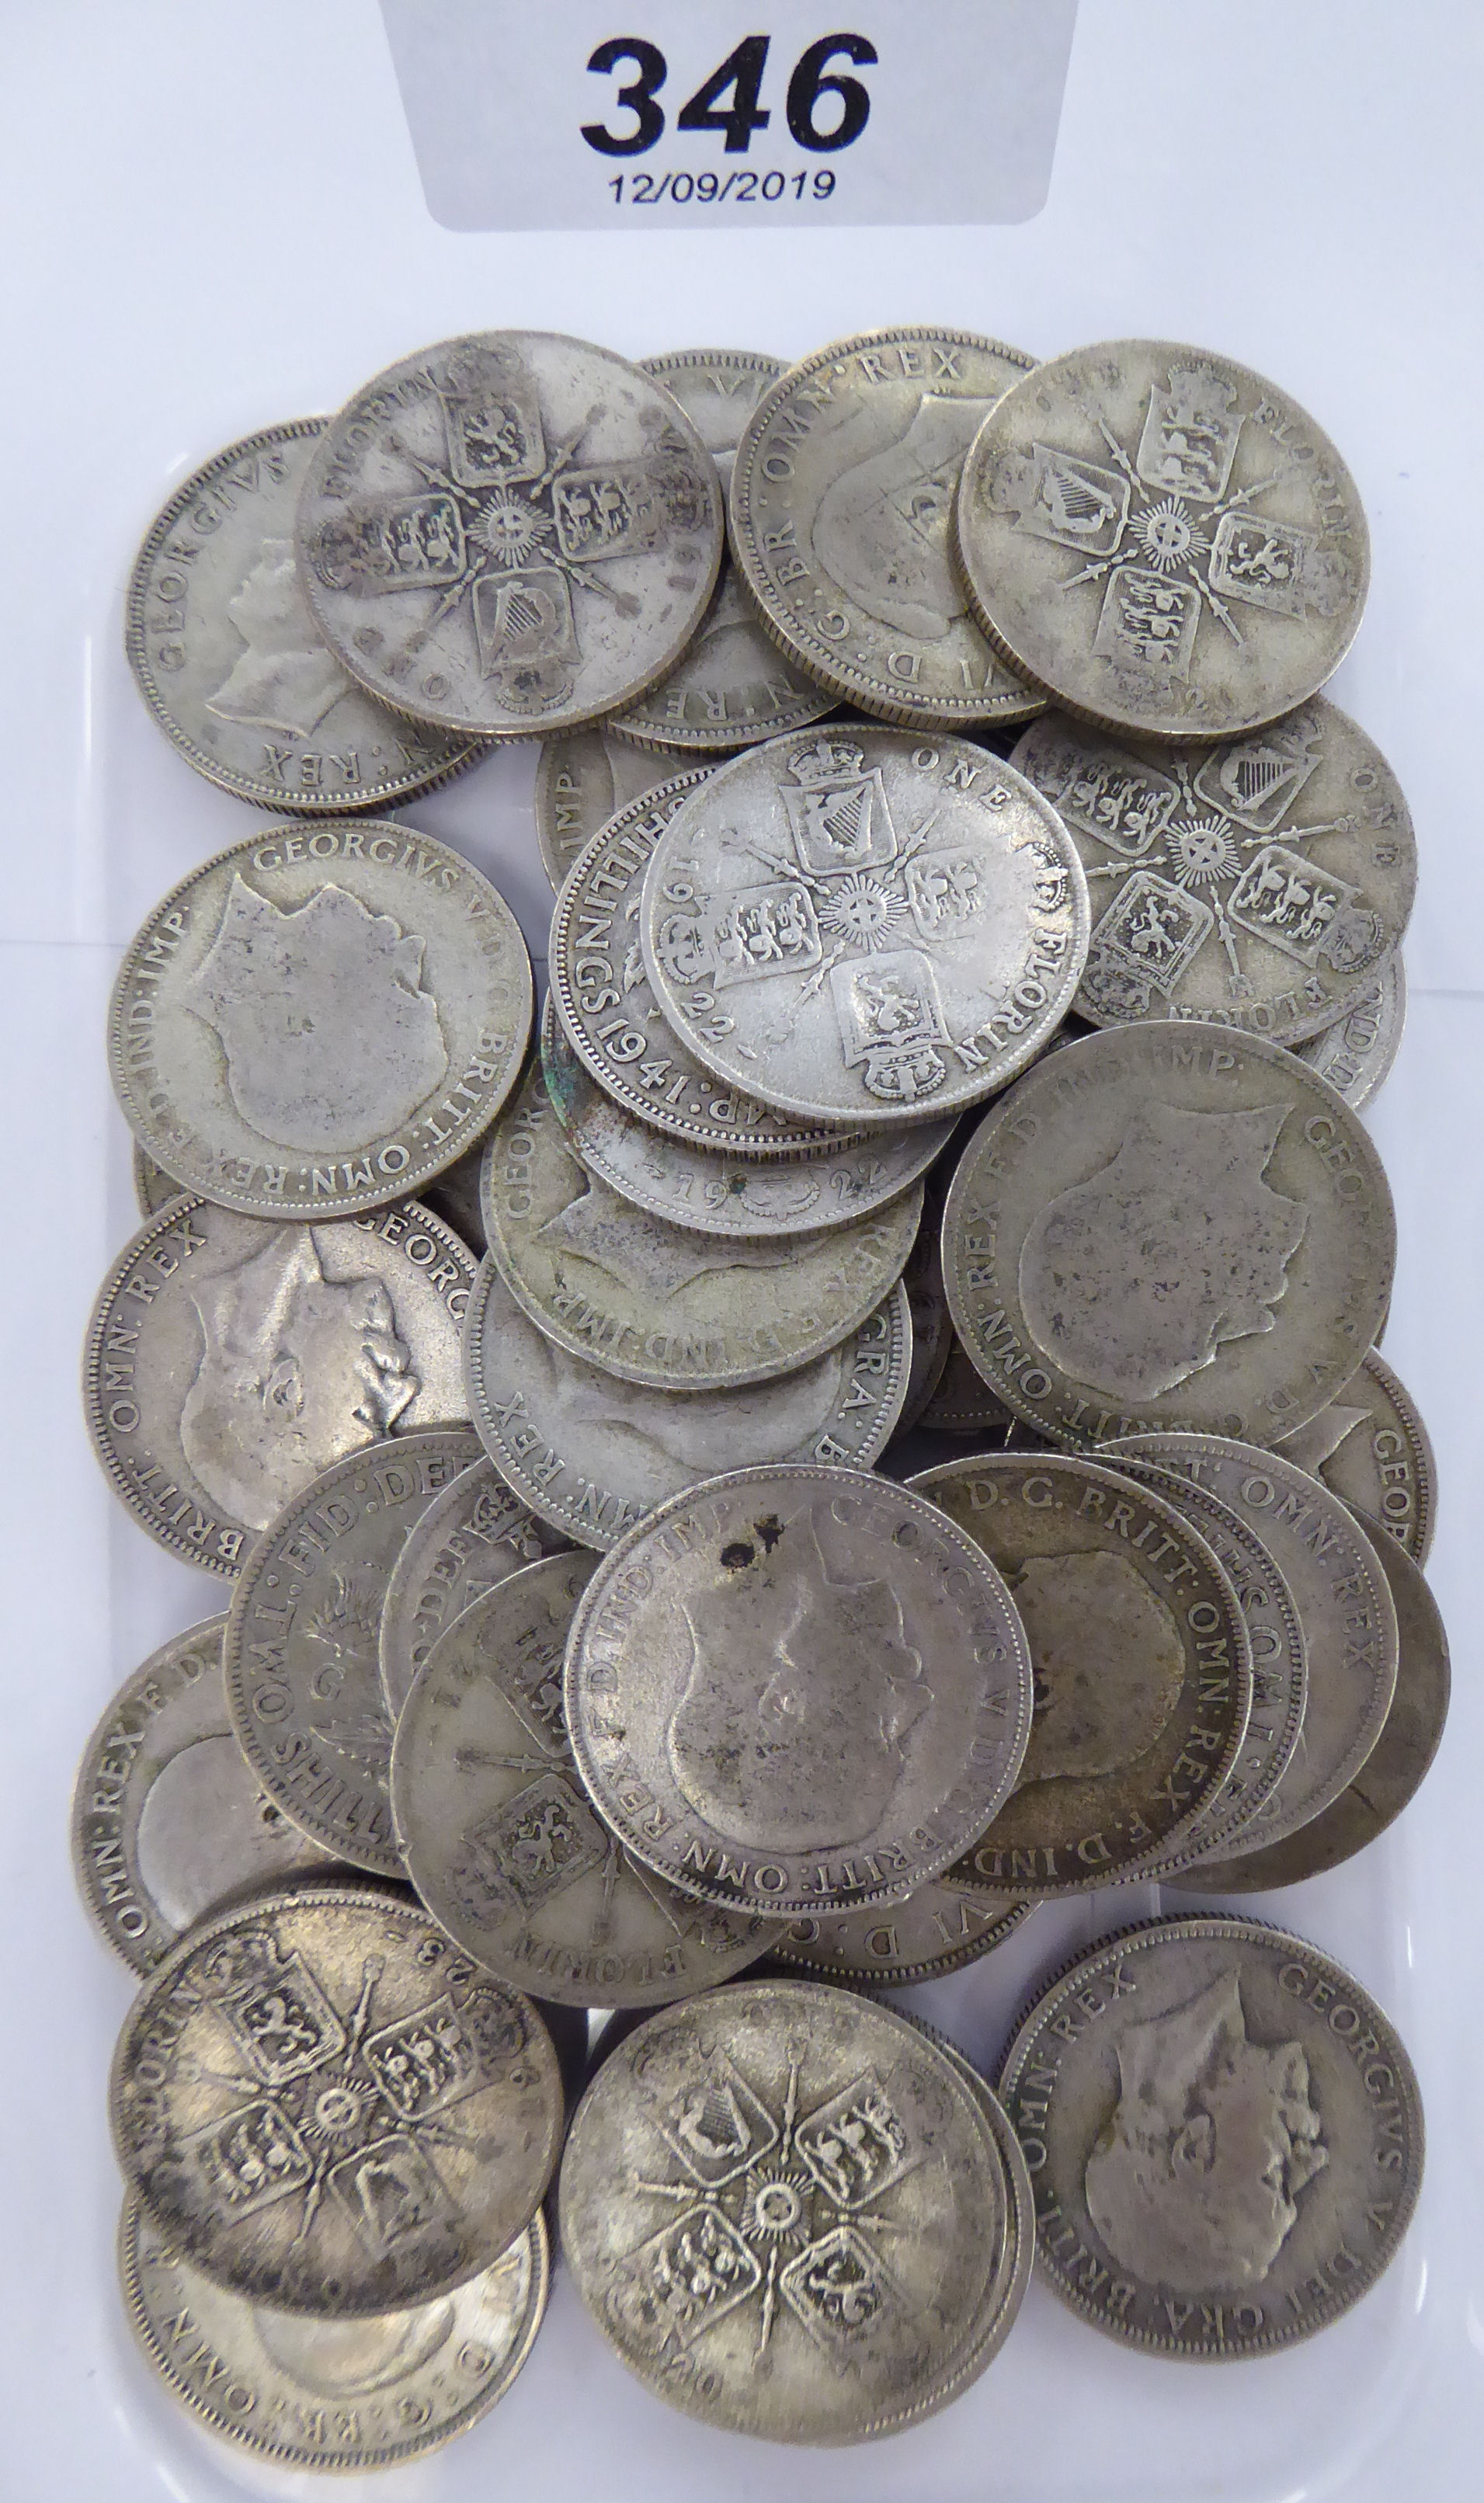 Uncollated pre 1949 British florins 11